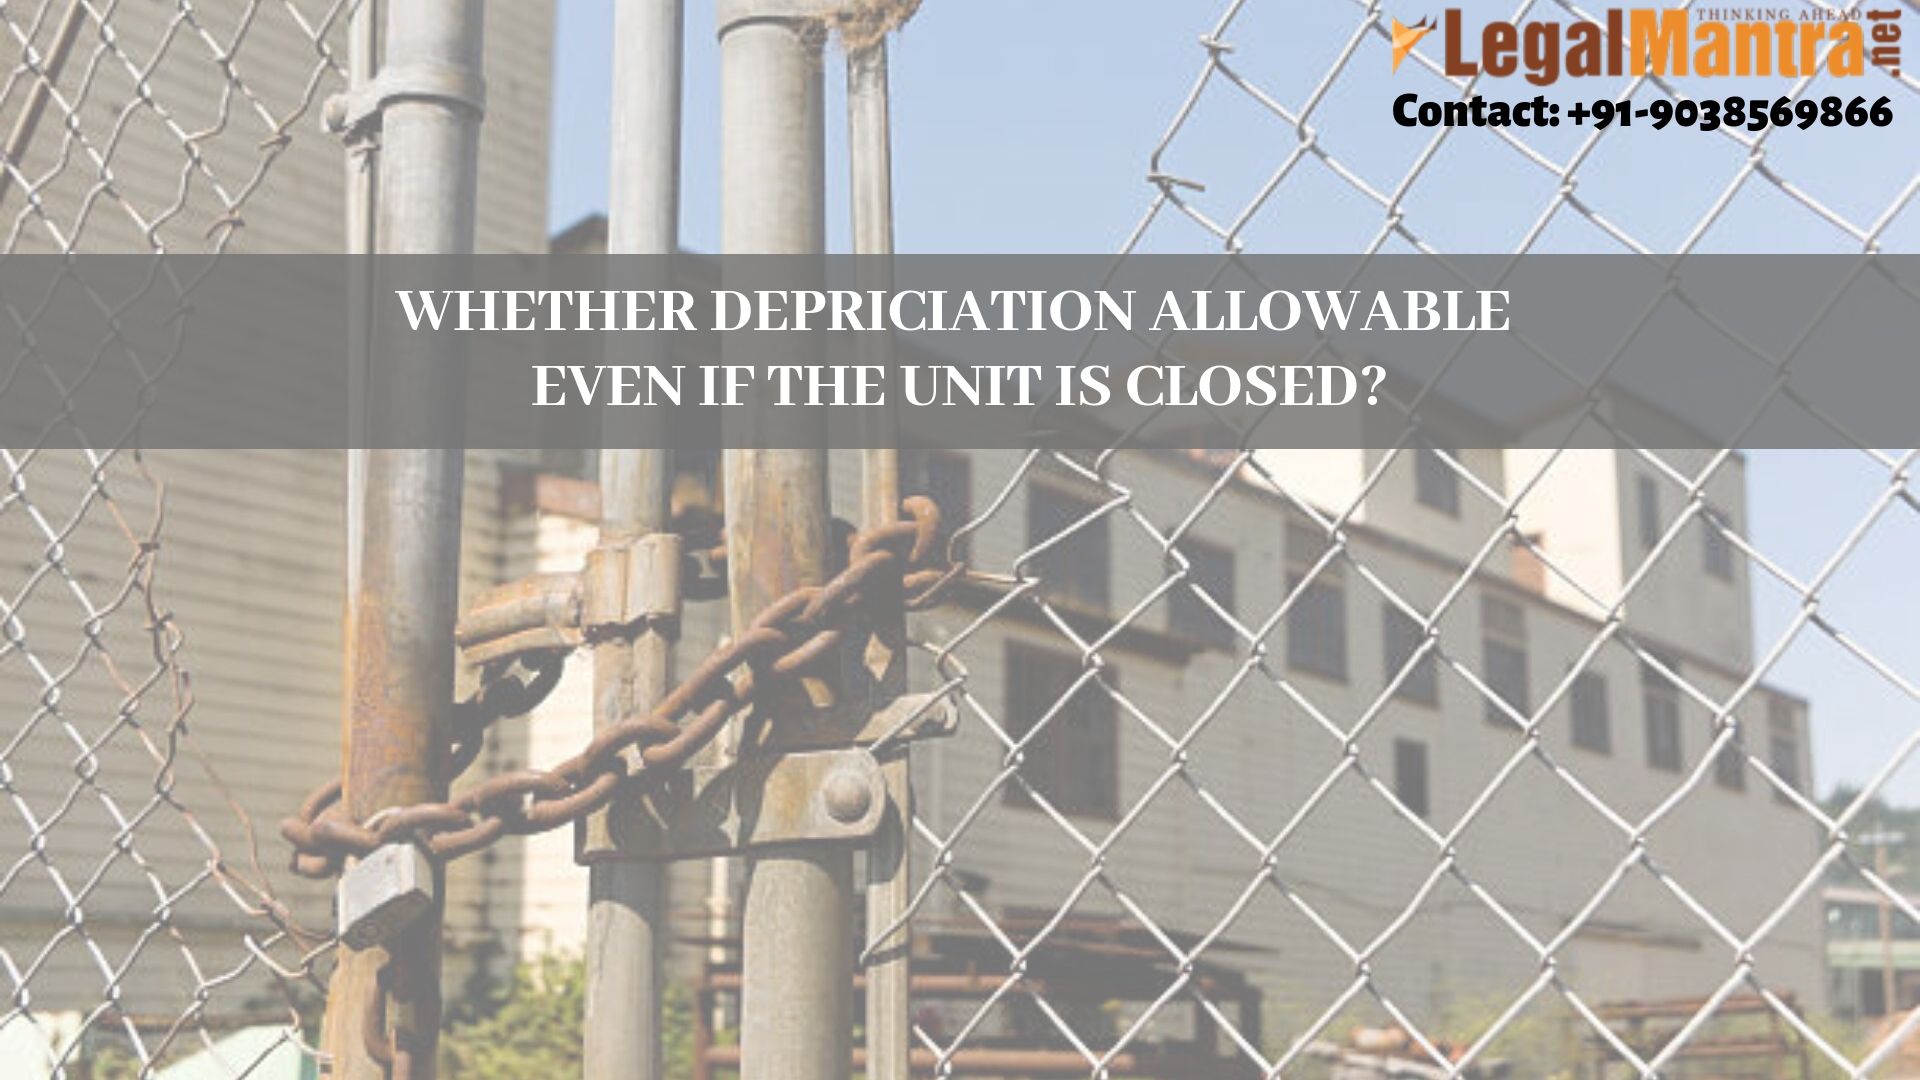 WHETHER DEPRICIATION ALLOWABLE EVEN IF THE UNIT IS CLOSED?